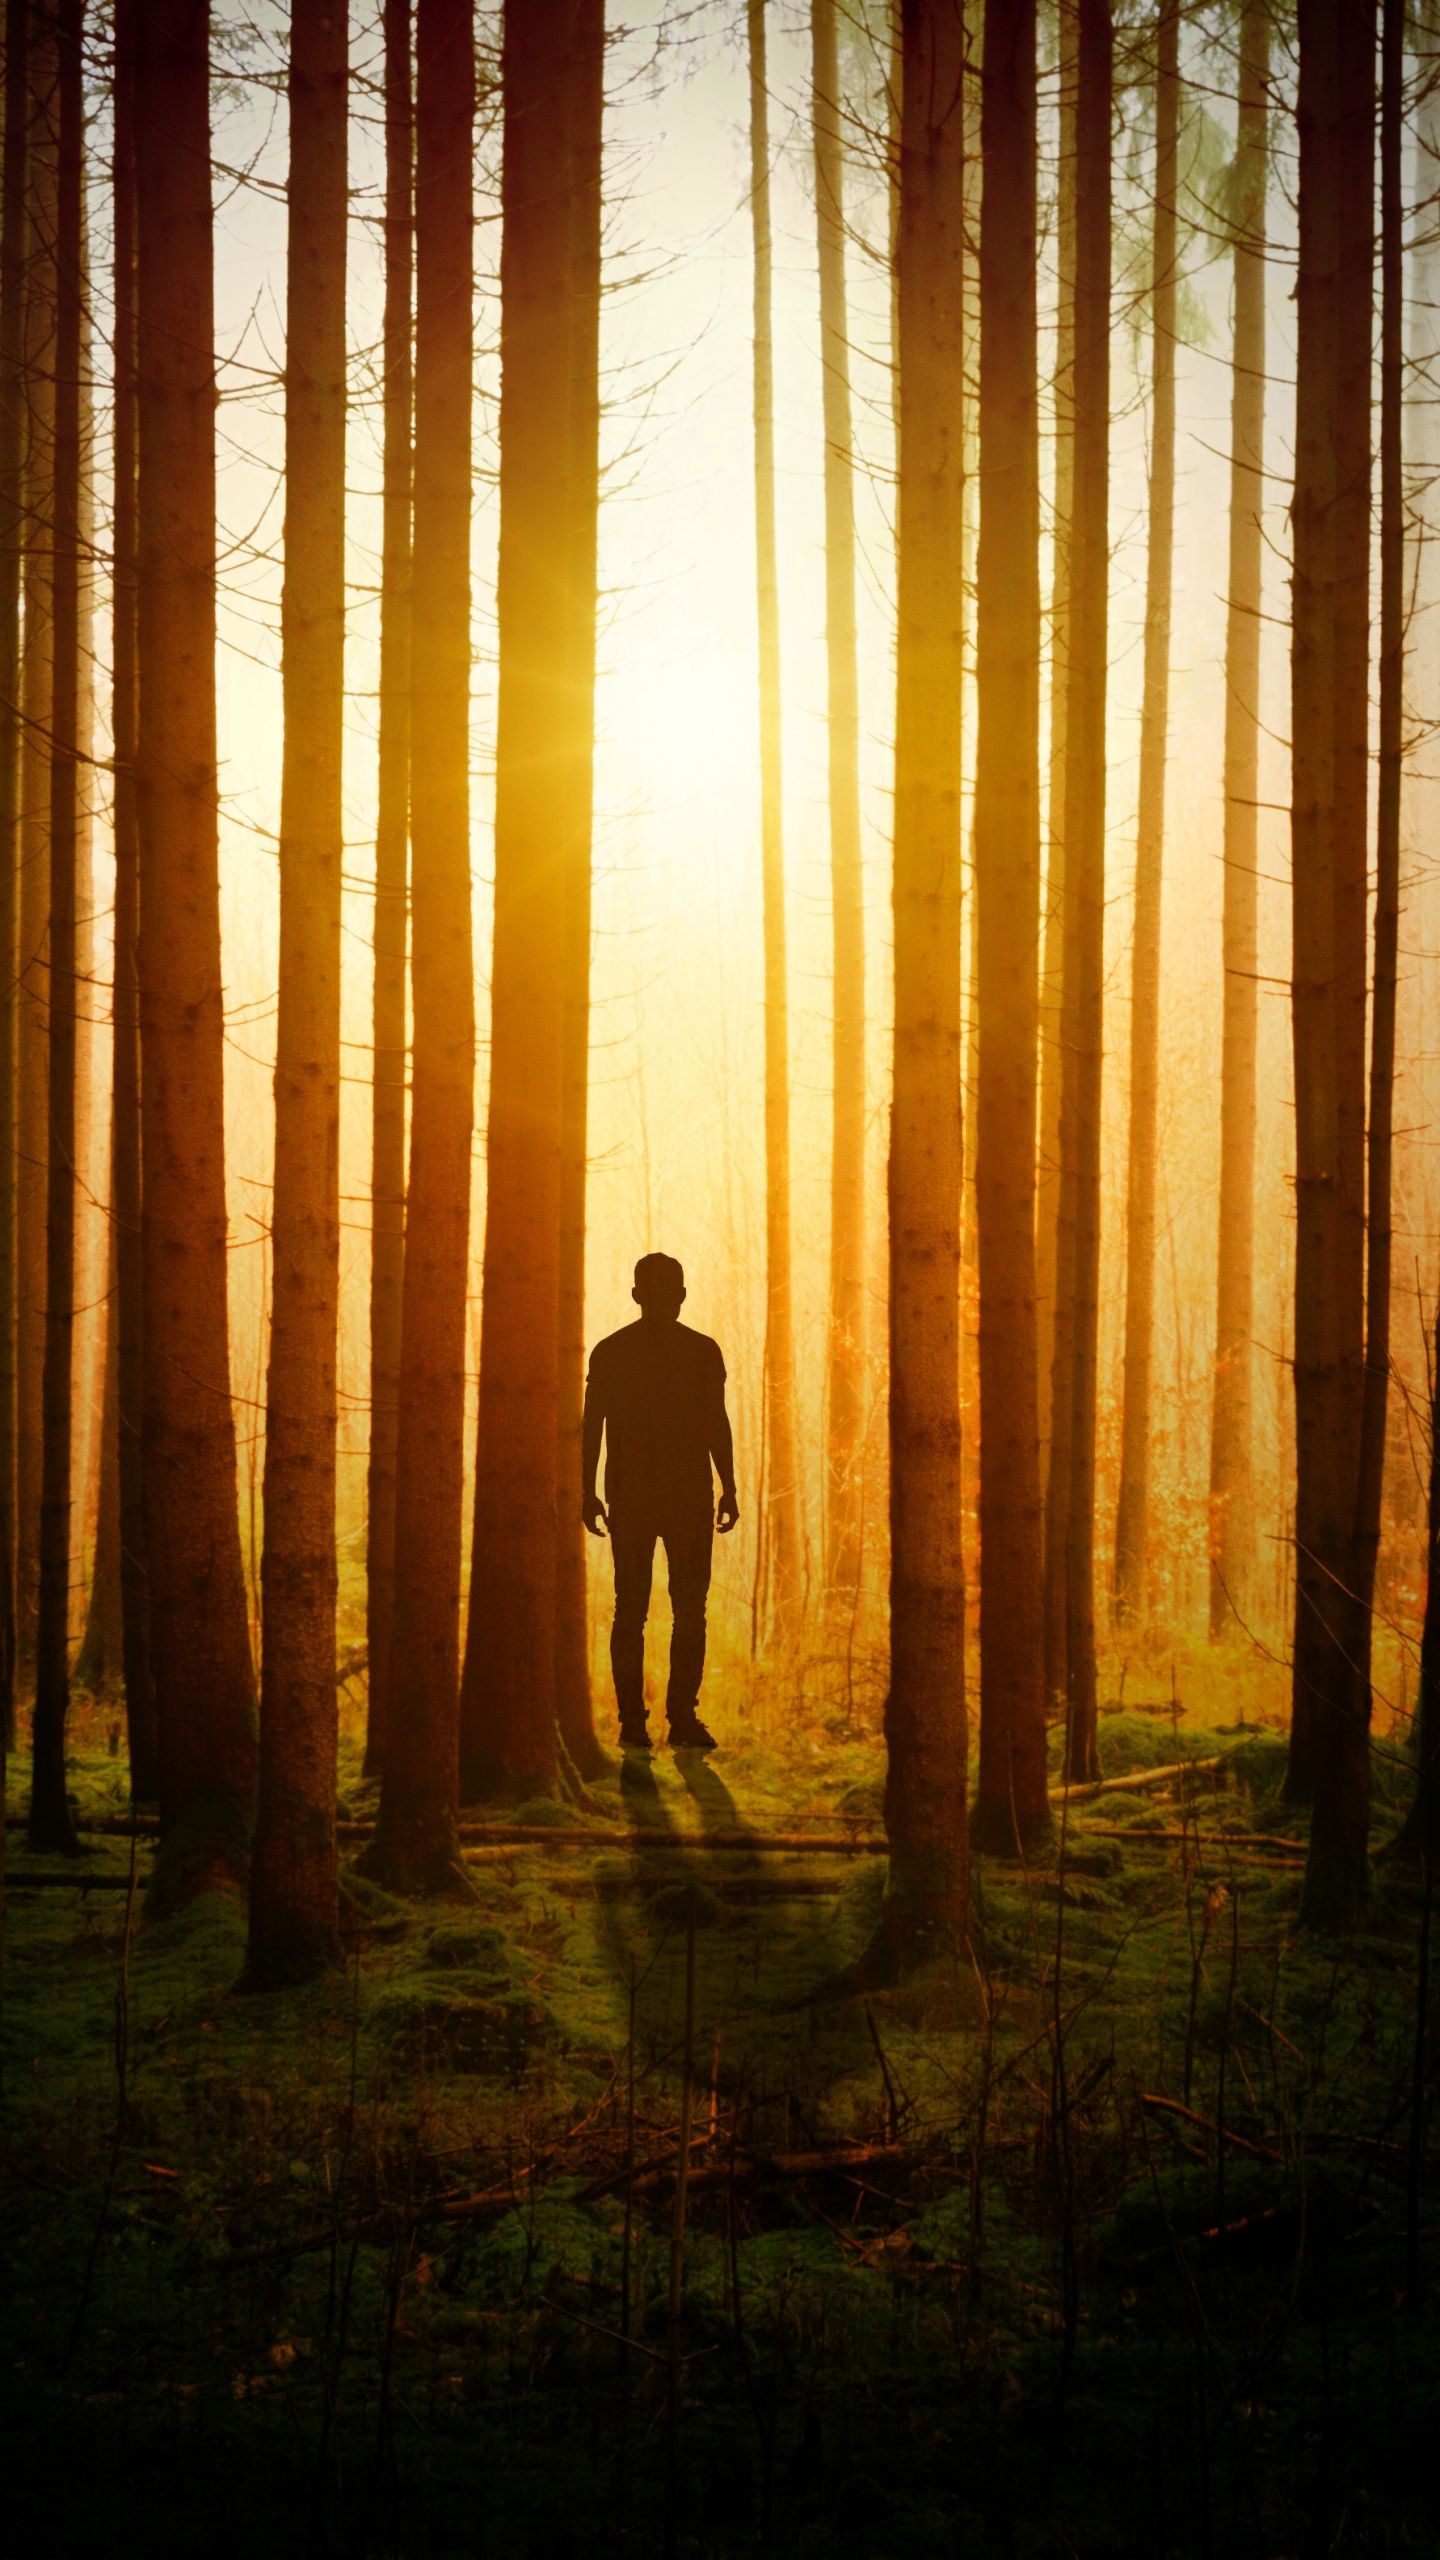 A man walking in the forest with the sun shining through the trees - Forest